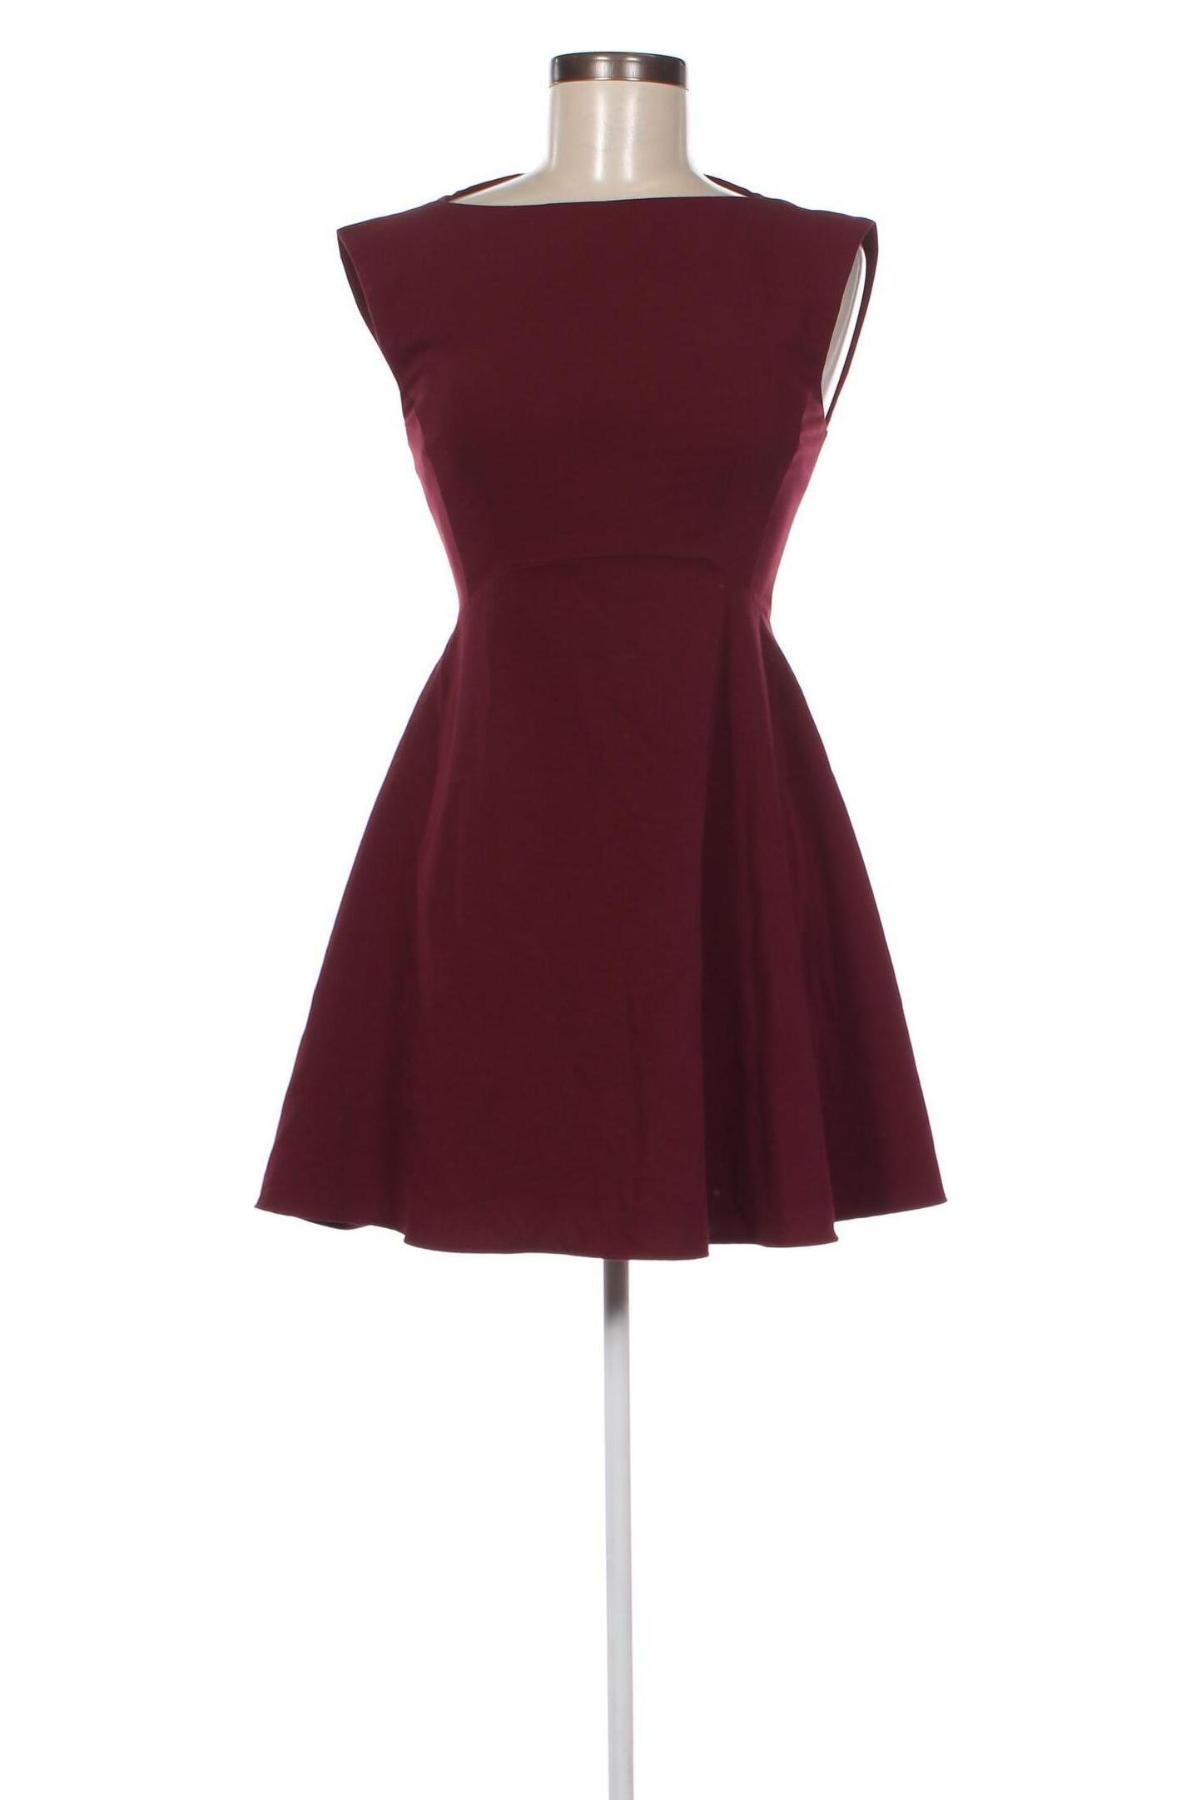 Kleid French Connection, Größe S, Farbe Rot, Preis 41,06 €